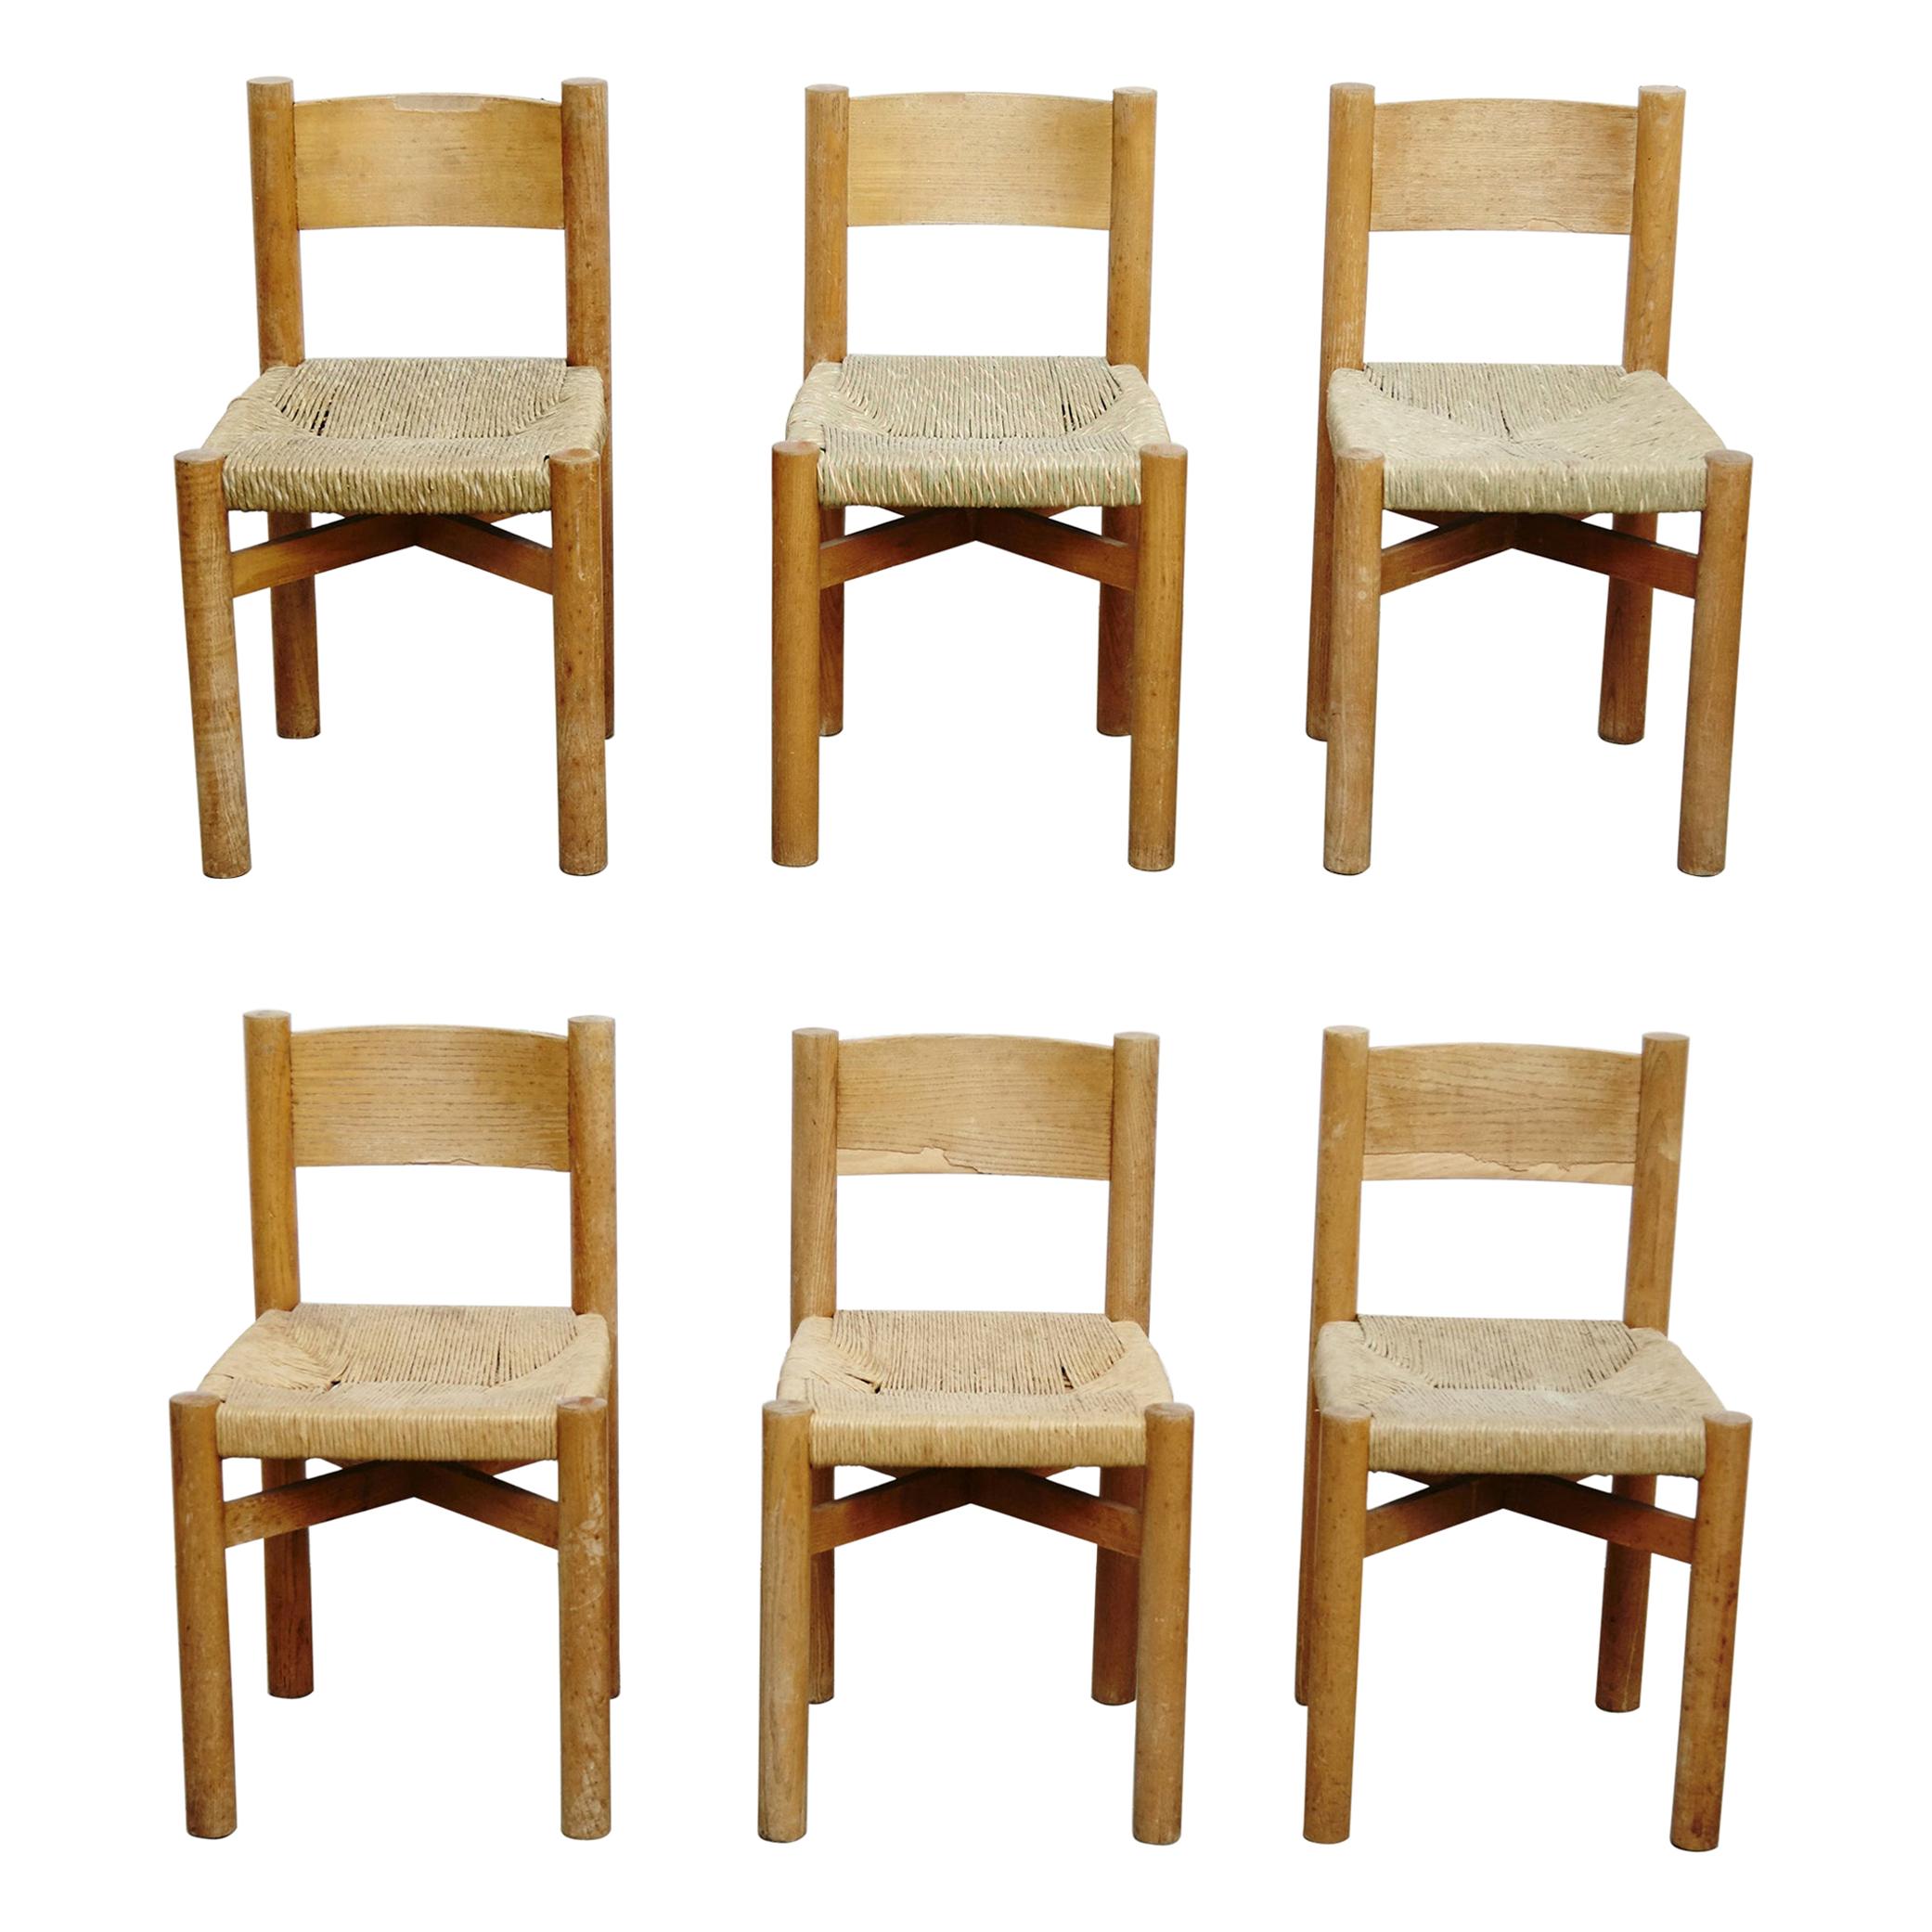 Set of 6 Meribel Chairs by Charlotte Perriand, circa 1950